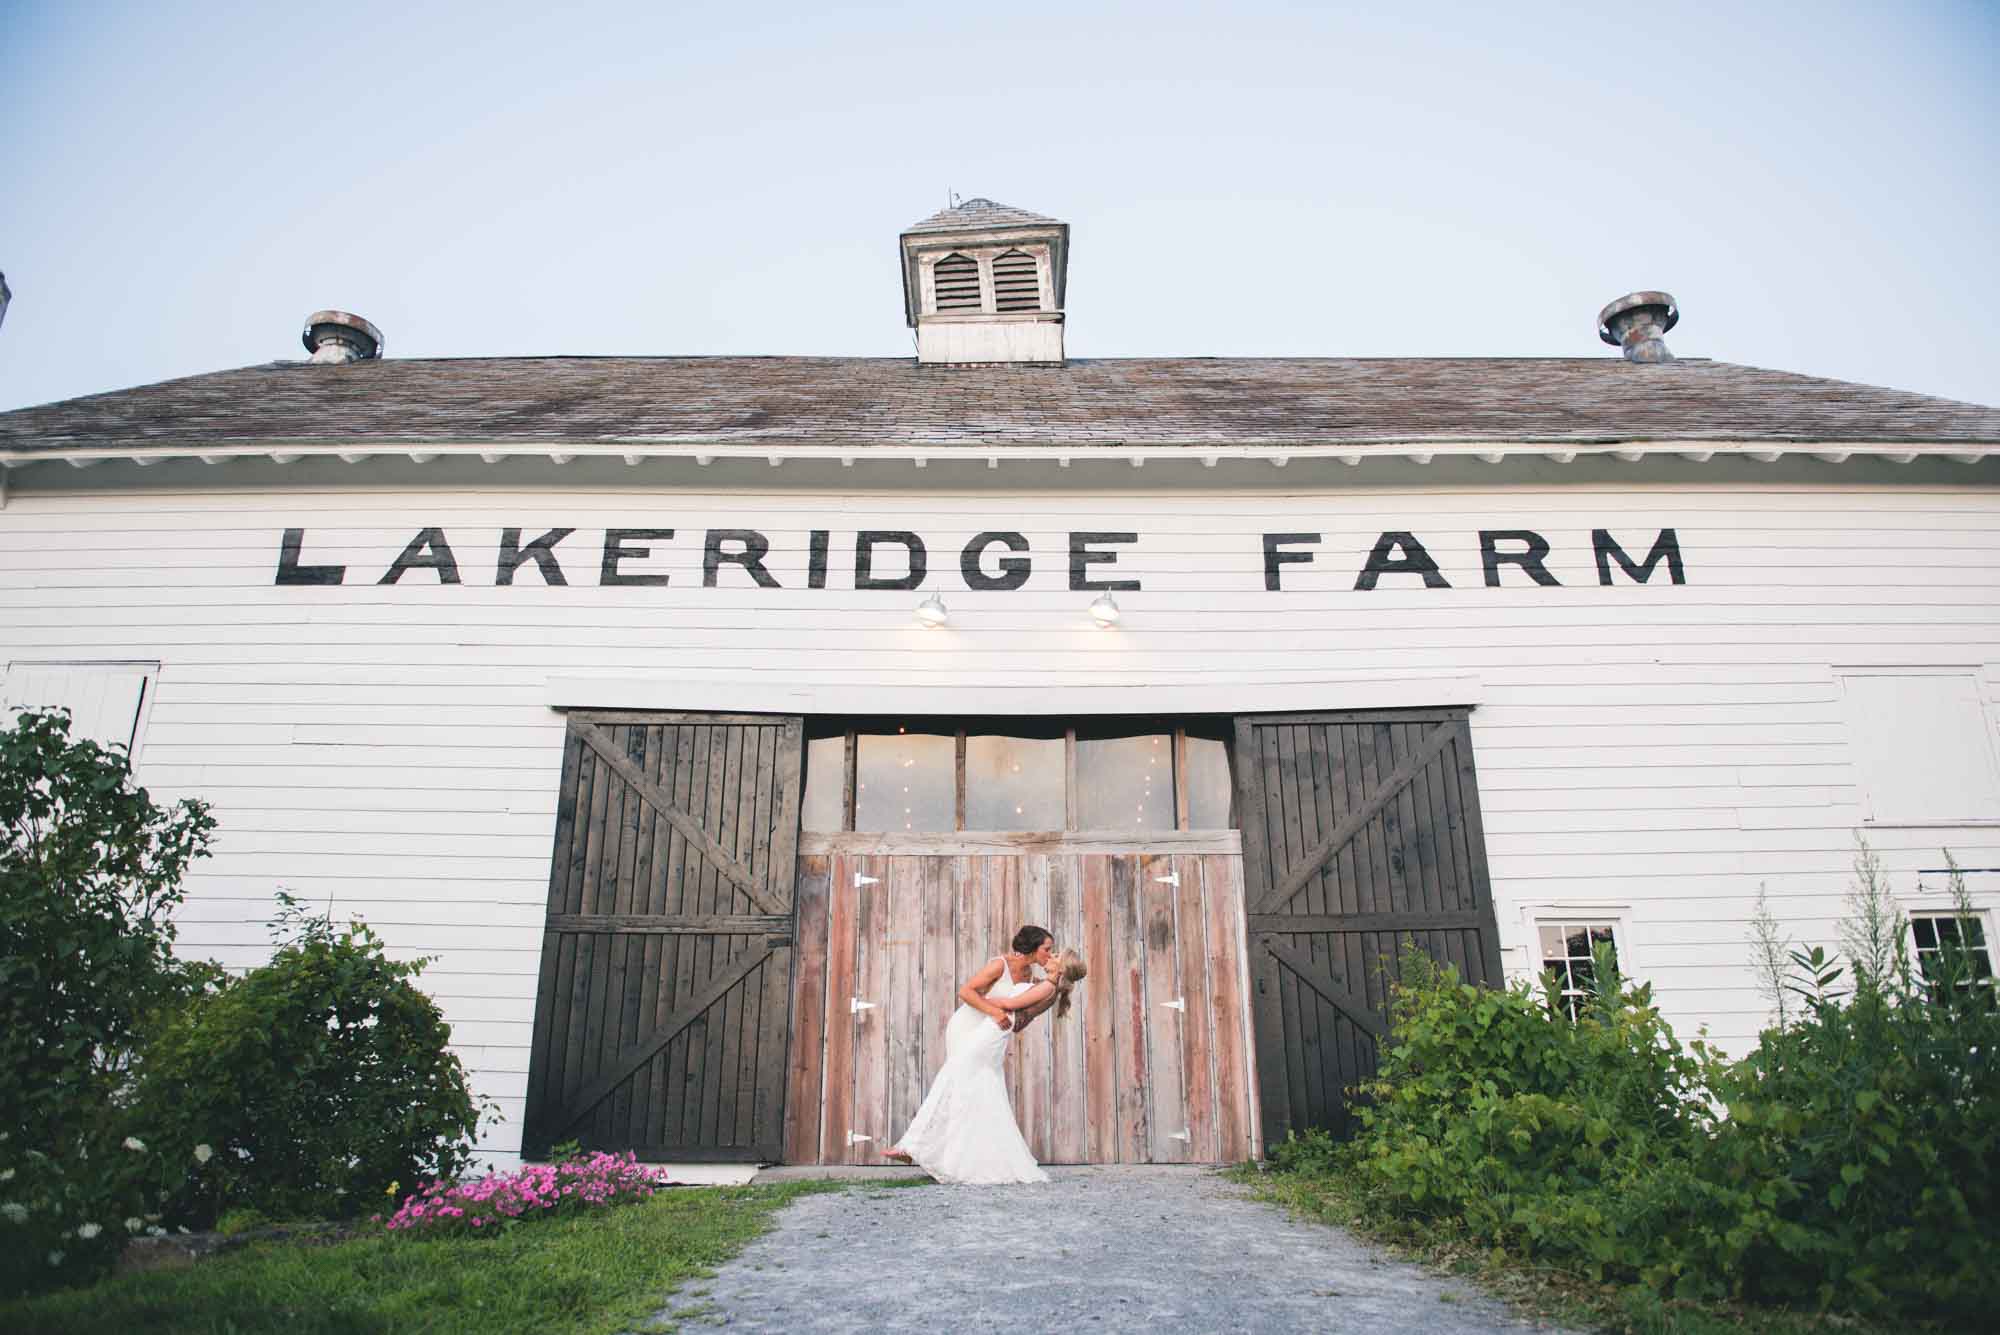 Elegant, outdoor wedding at historic farm in Ballston Lake, New York. McCarthy Imagerie featured on Equally Wed, the leading LGBTQ+ wedding magazine and vendor directory.